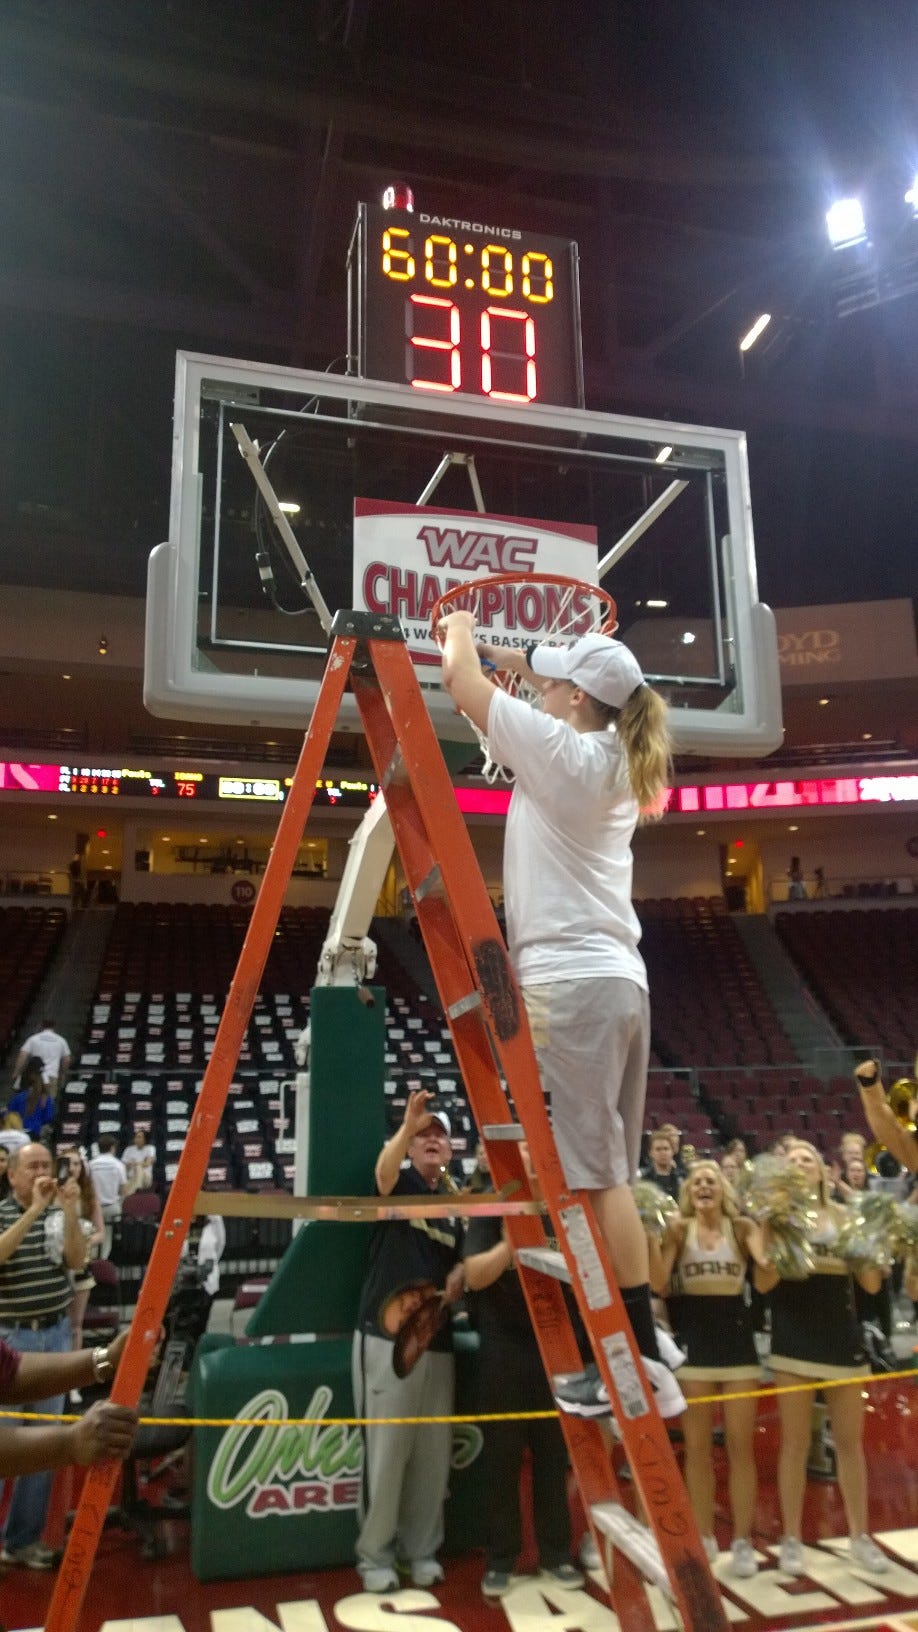 Stacey Barr cutting down the net after winning the 2014 WAC Tournament - Courtesy University of Idaho